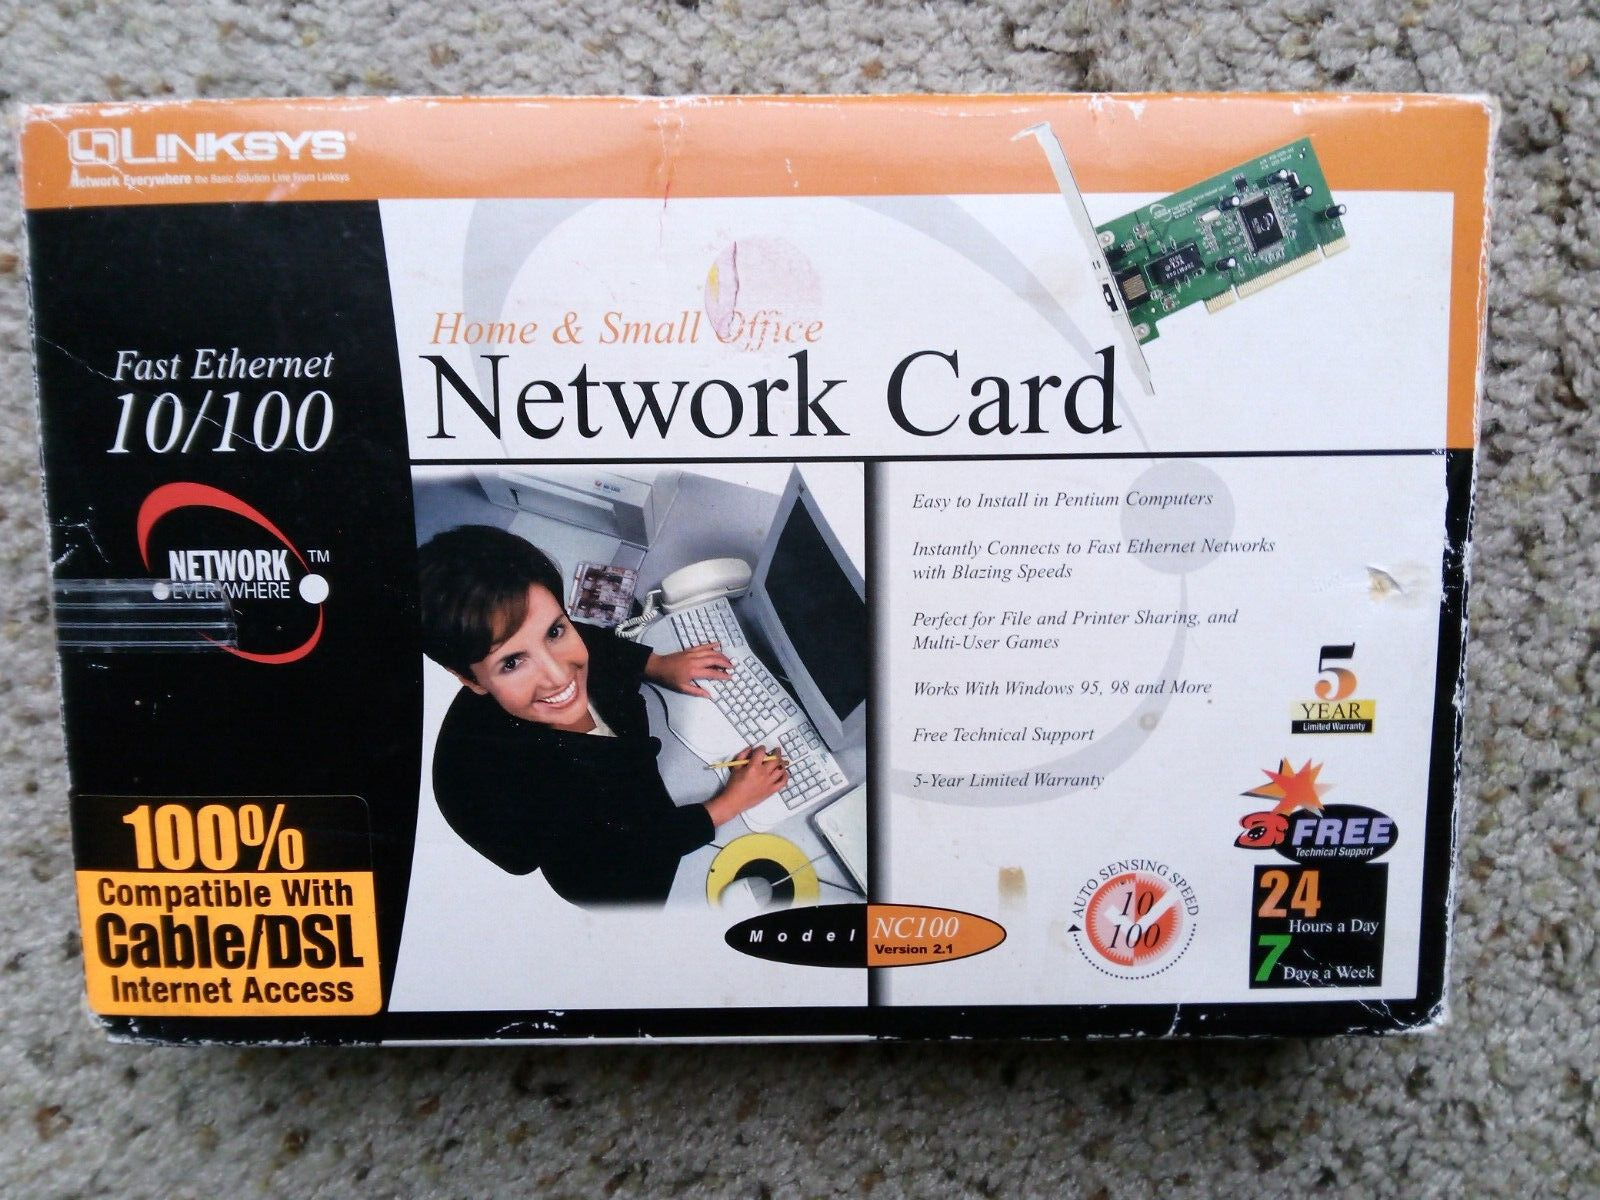 linksys network card home and small office model NC100 version 2.1